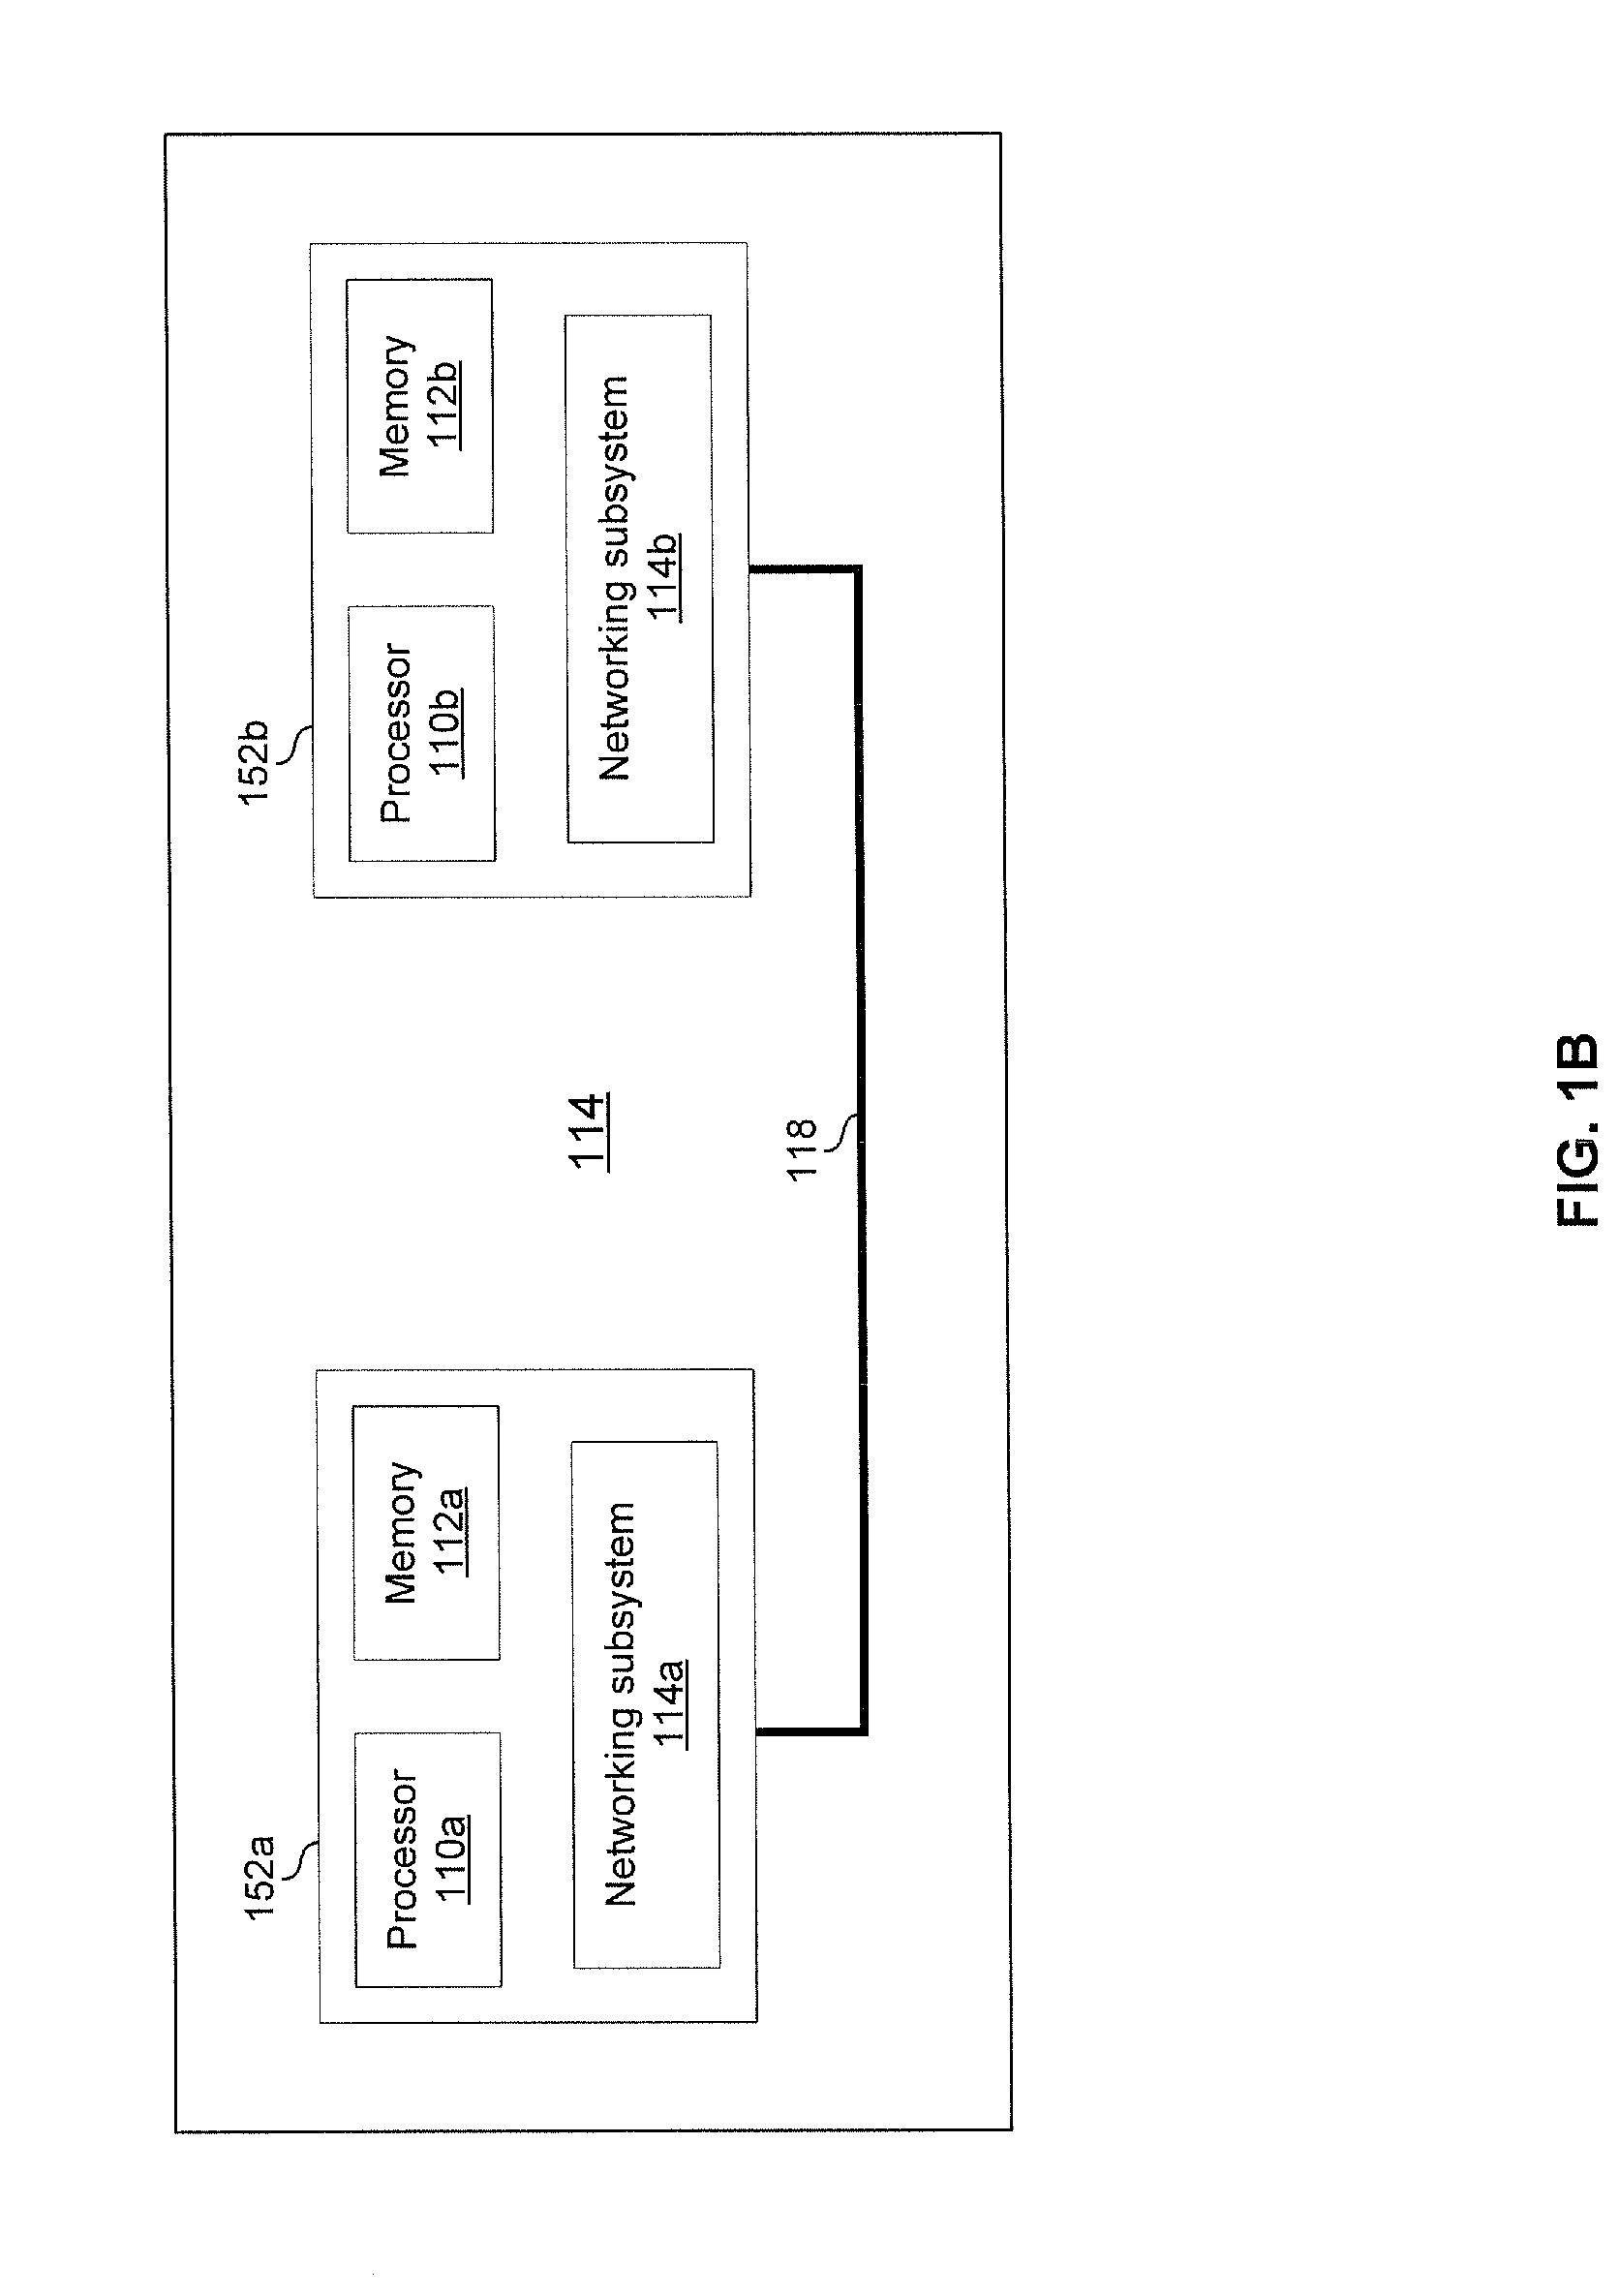 Method and system for energy efficient networking over a serial communication channel